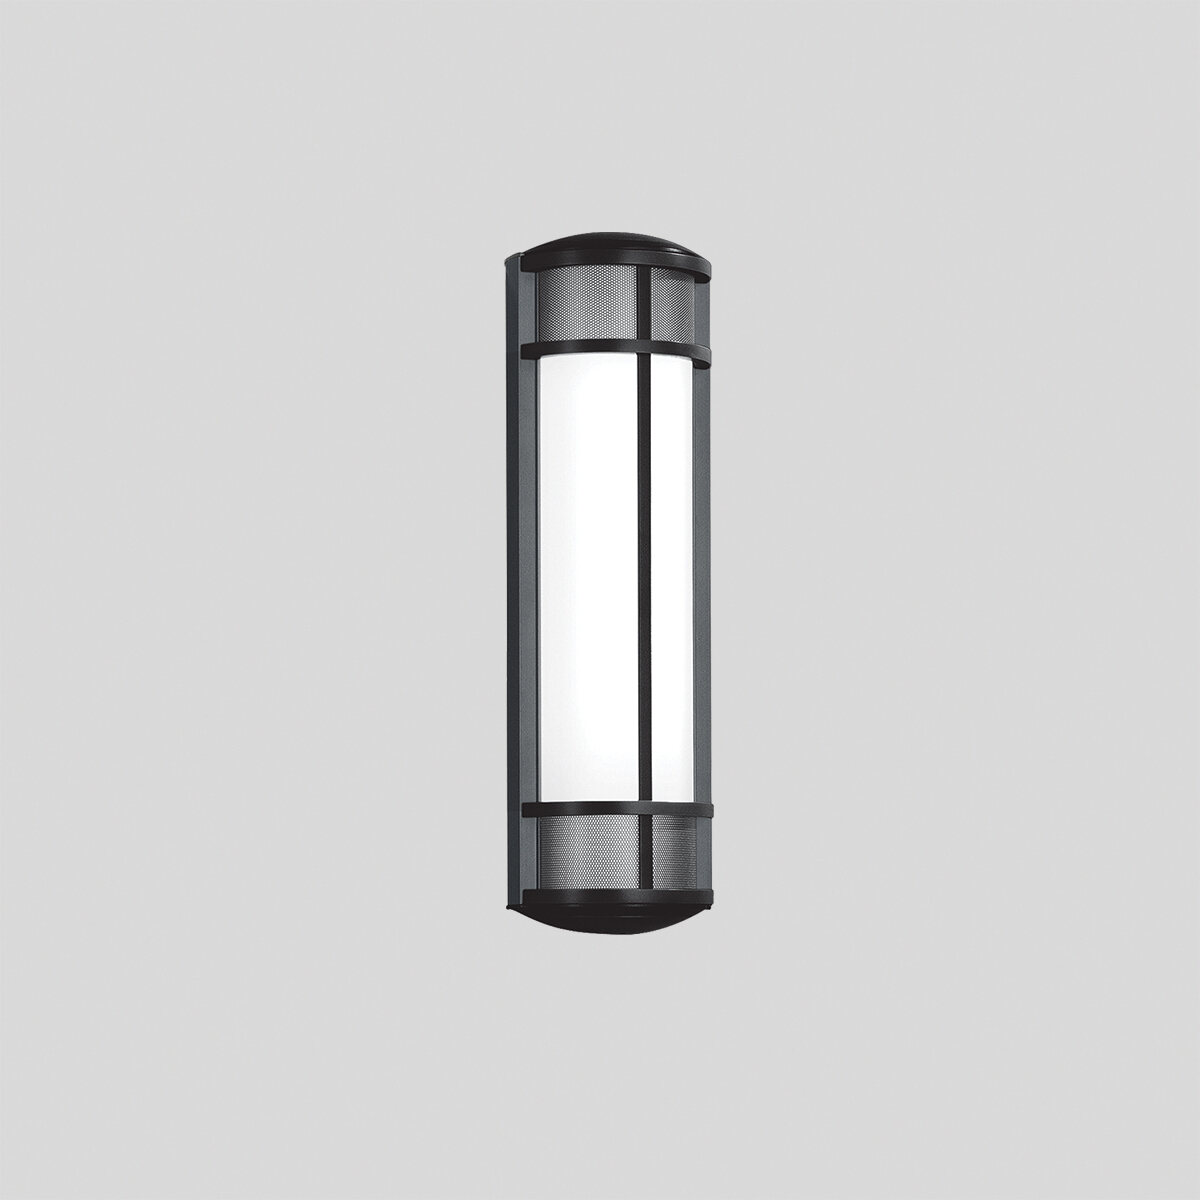 Avatar OW1331 wall outdoor sconce lighting 20” perforated